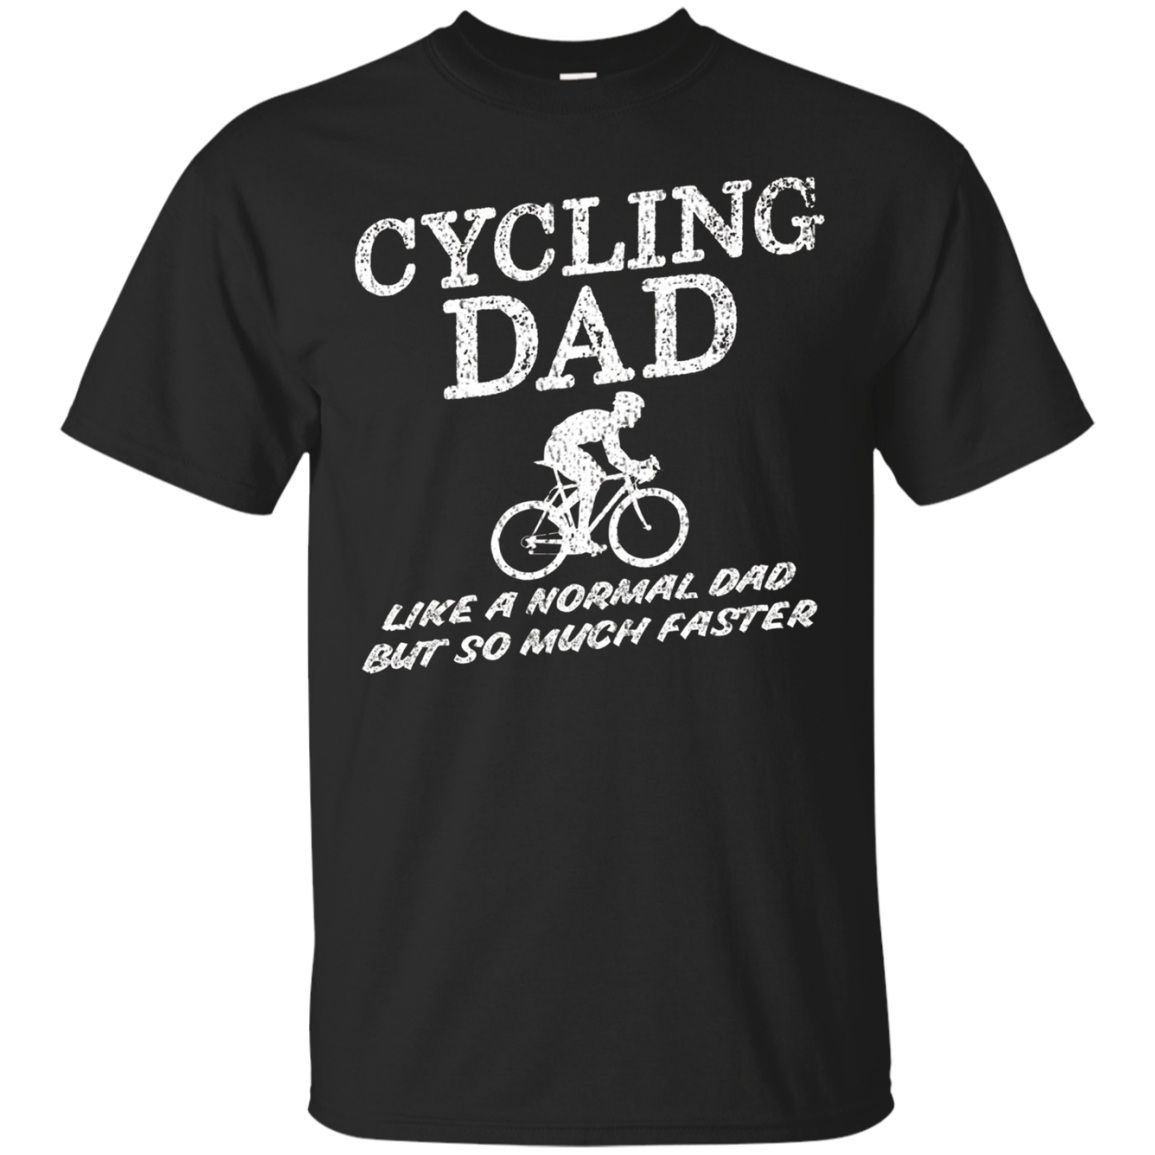 S Funny Cycling Dad Like Normal But Faster Cyclist T Shirt